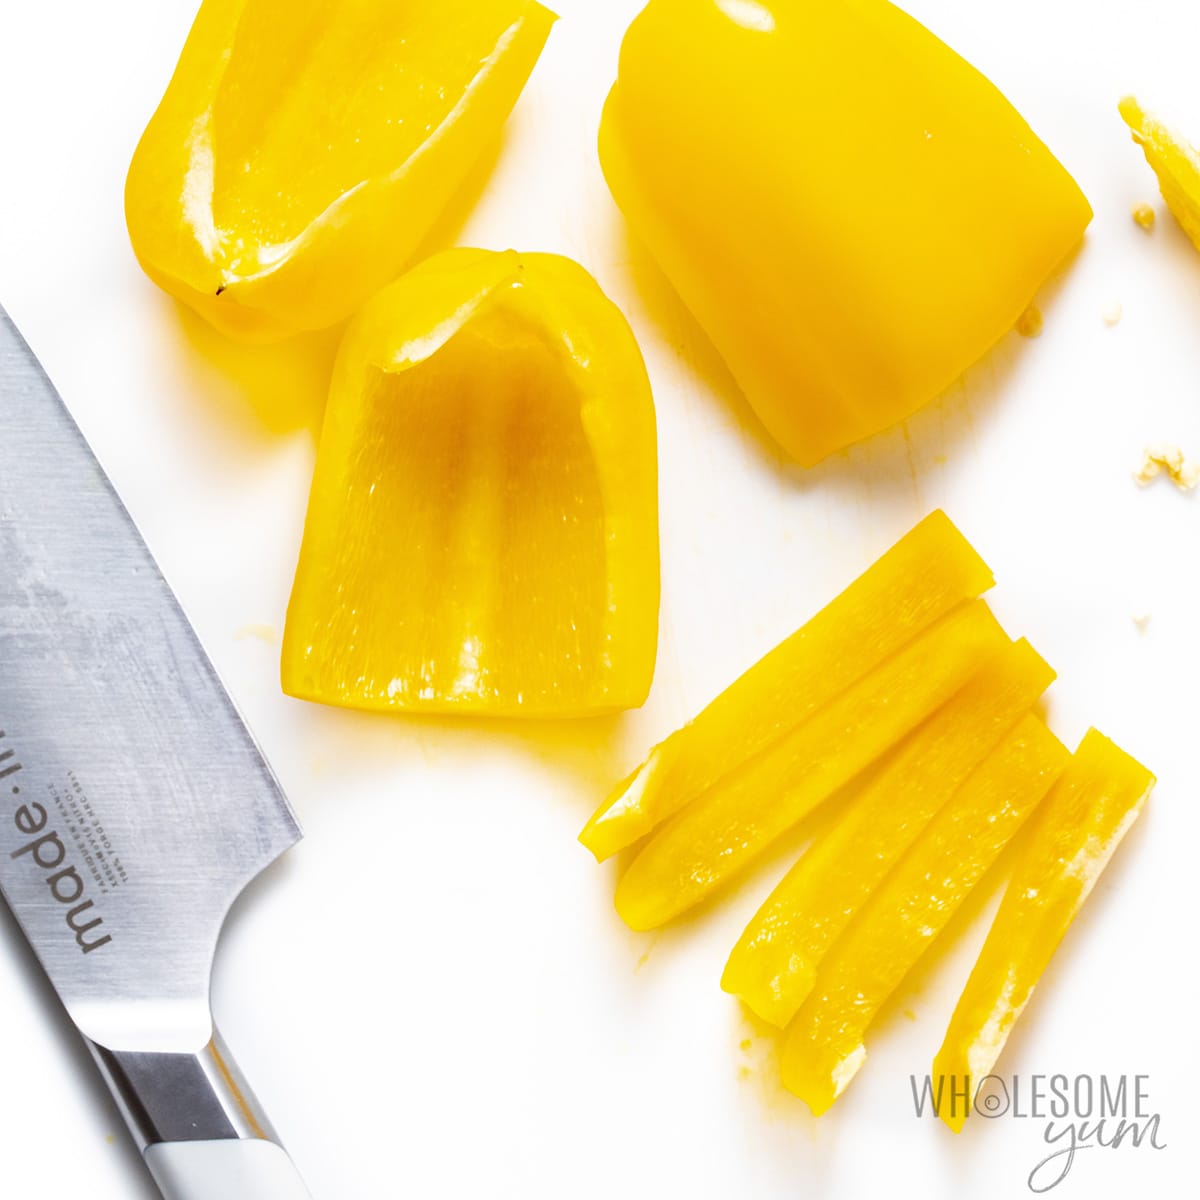 Yellow bell peppers sliced into strips.